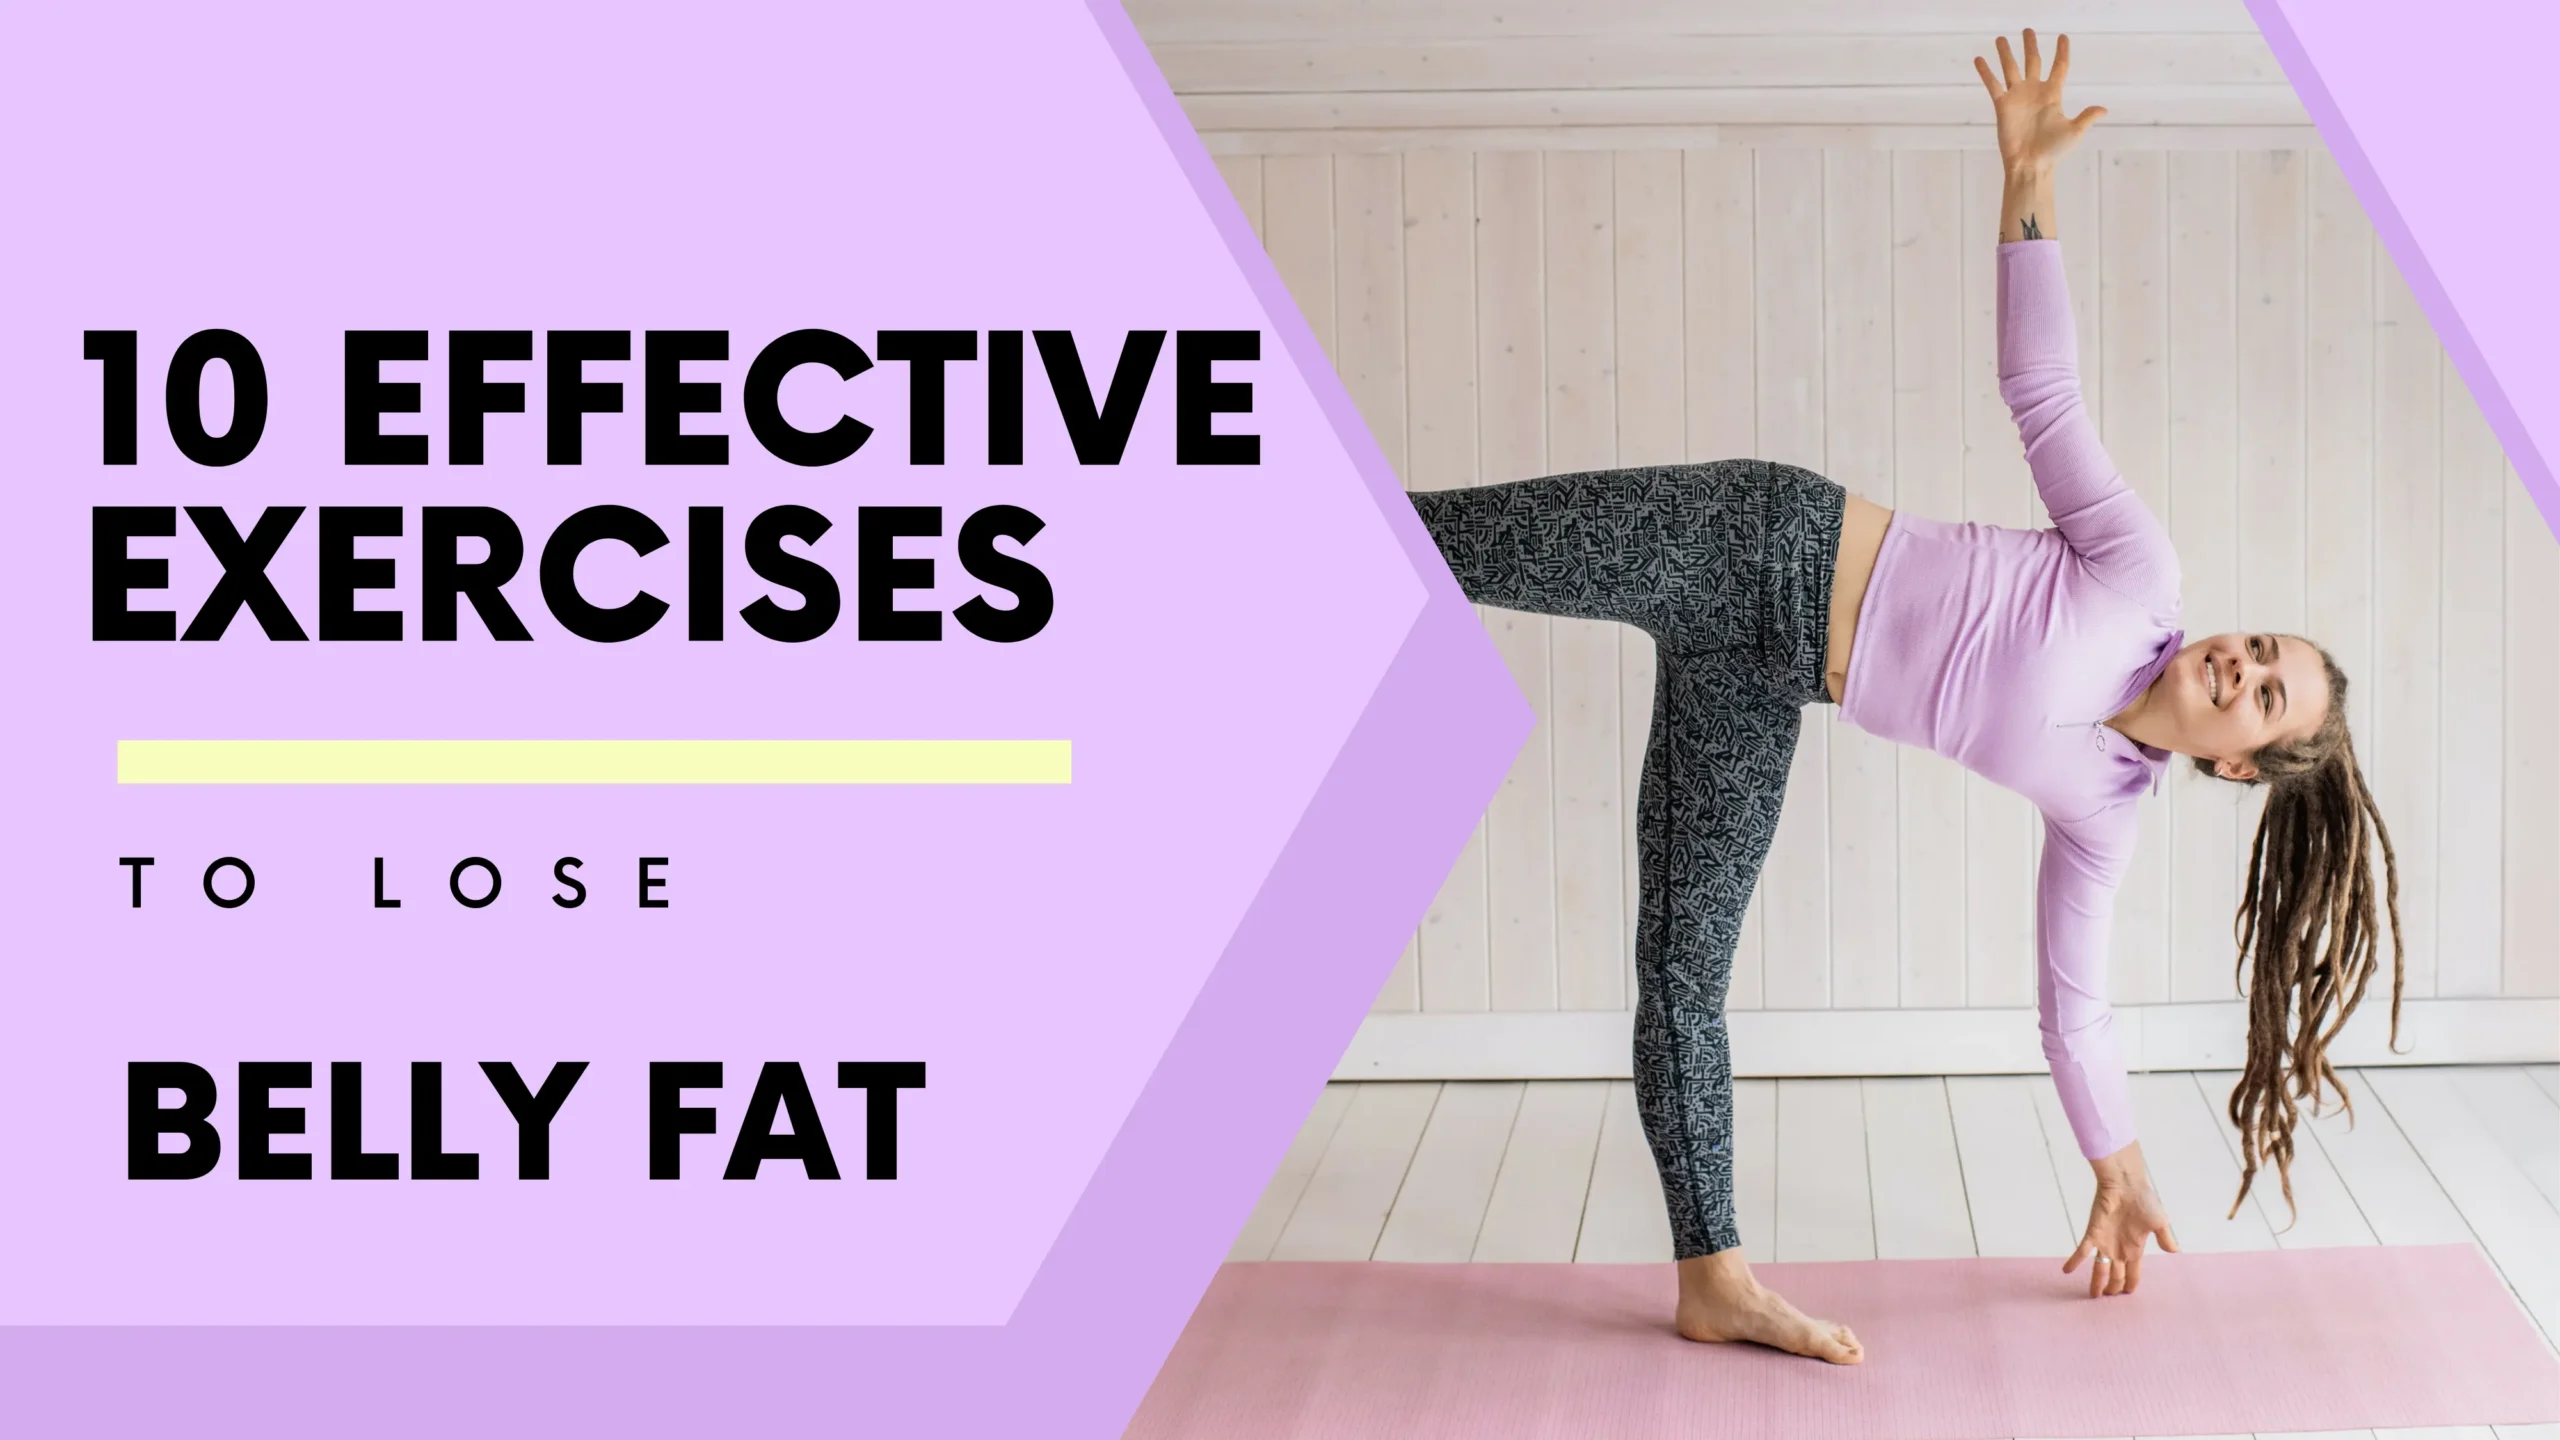 10 Effective Exercises to Lose Belly Fat